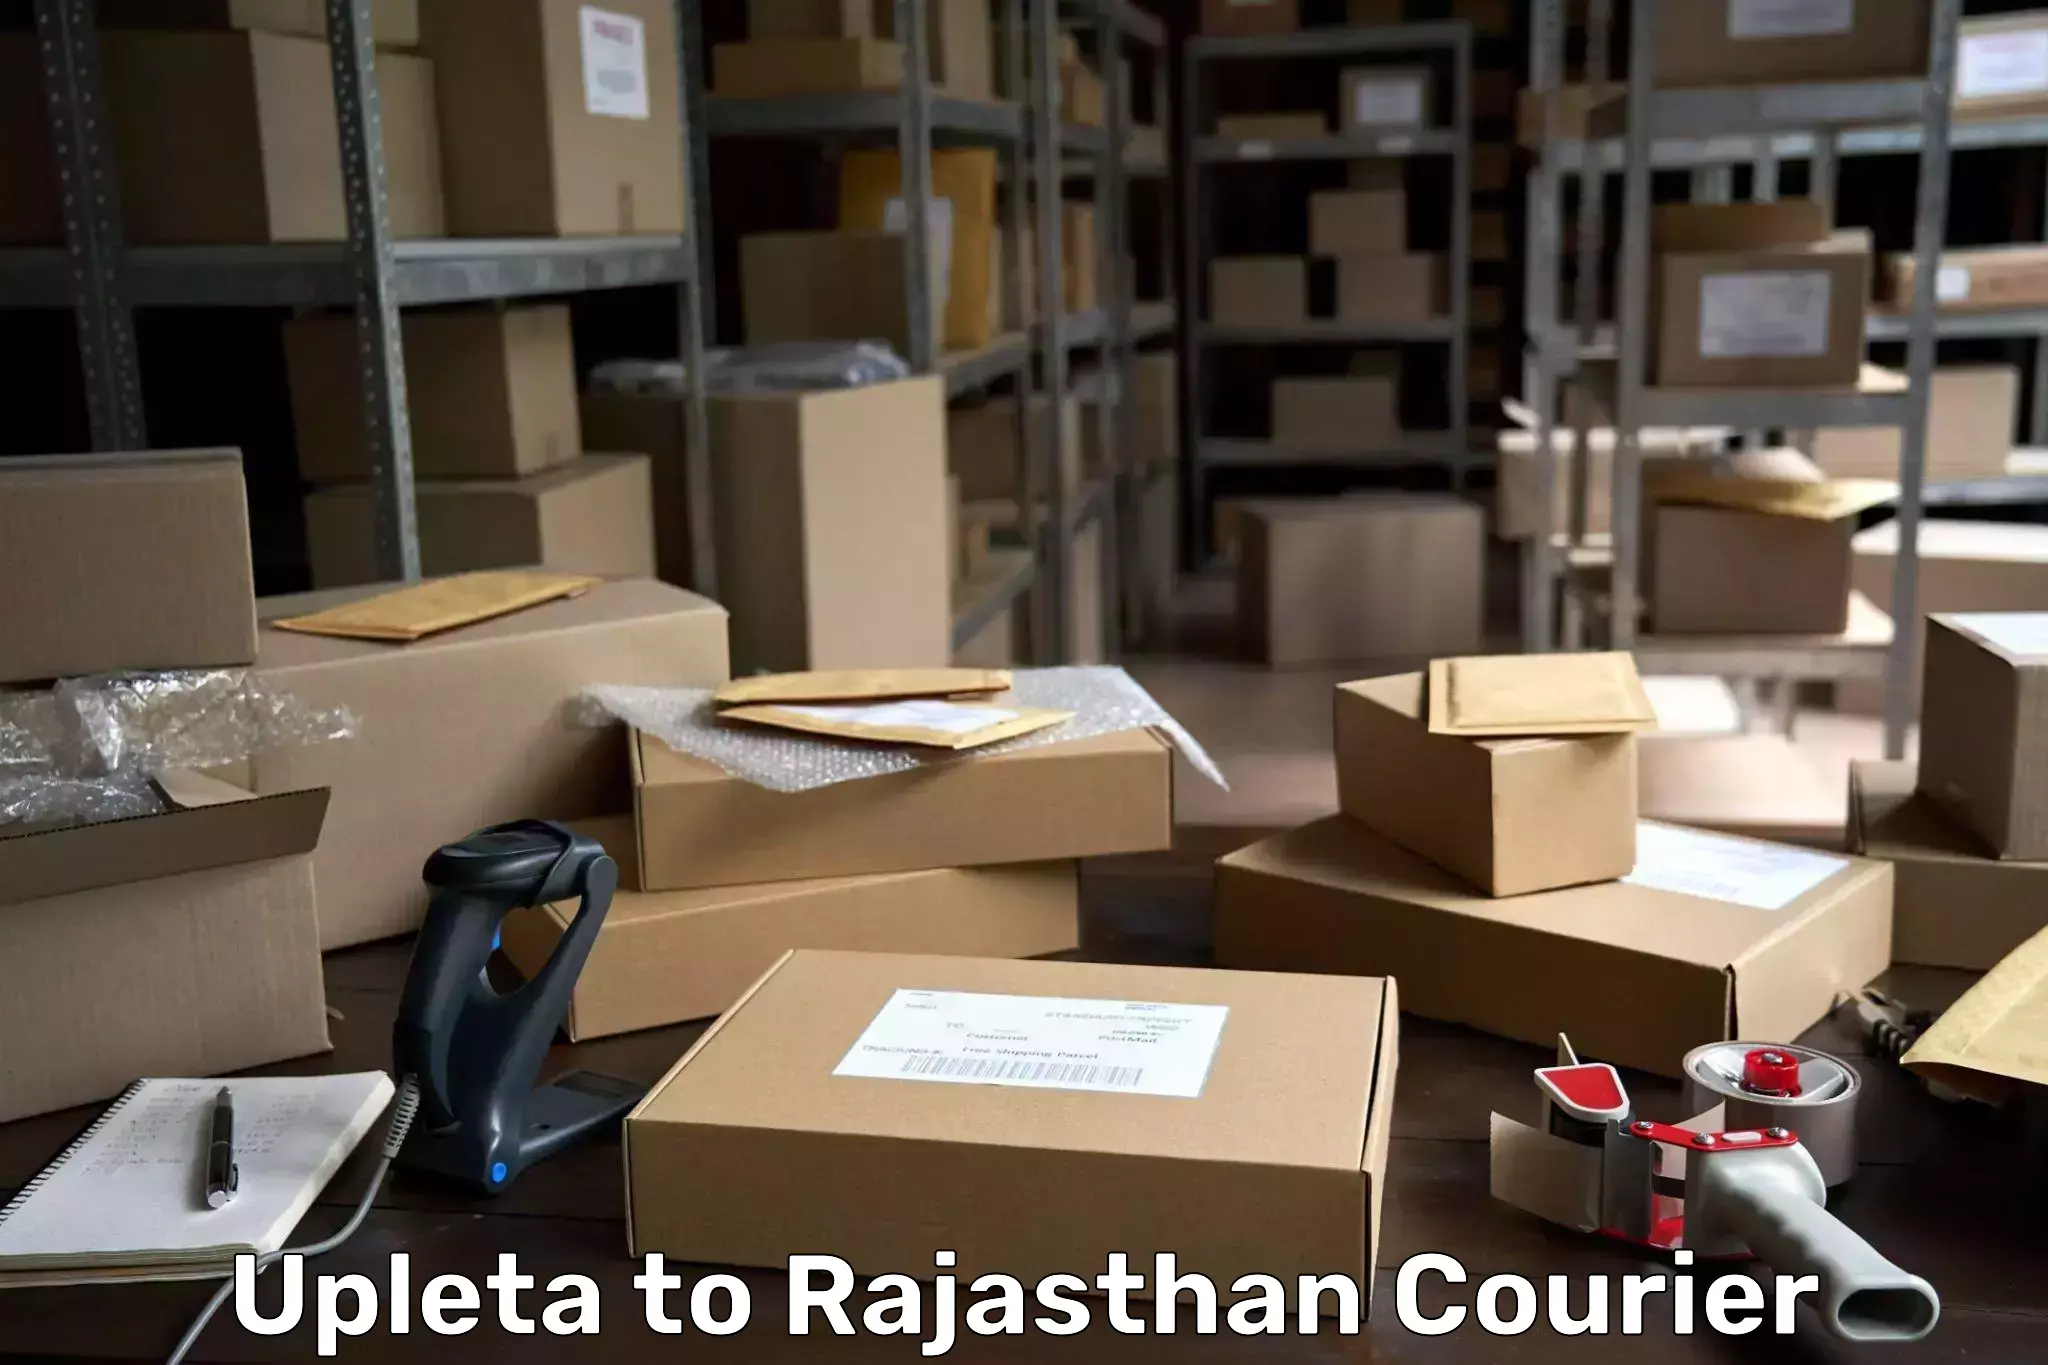 State-of-the-art courier technology in Upleta to Rajasthan